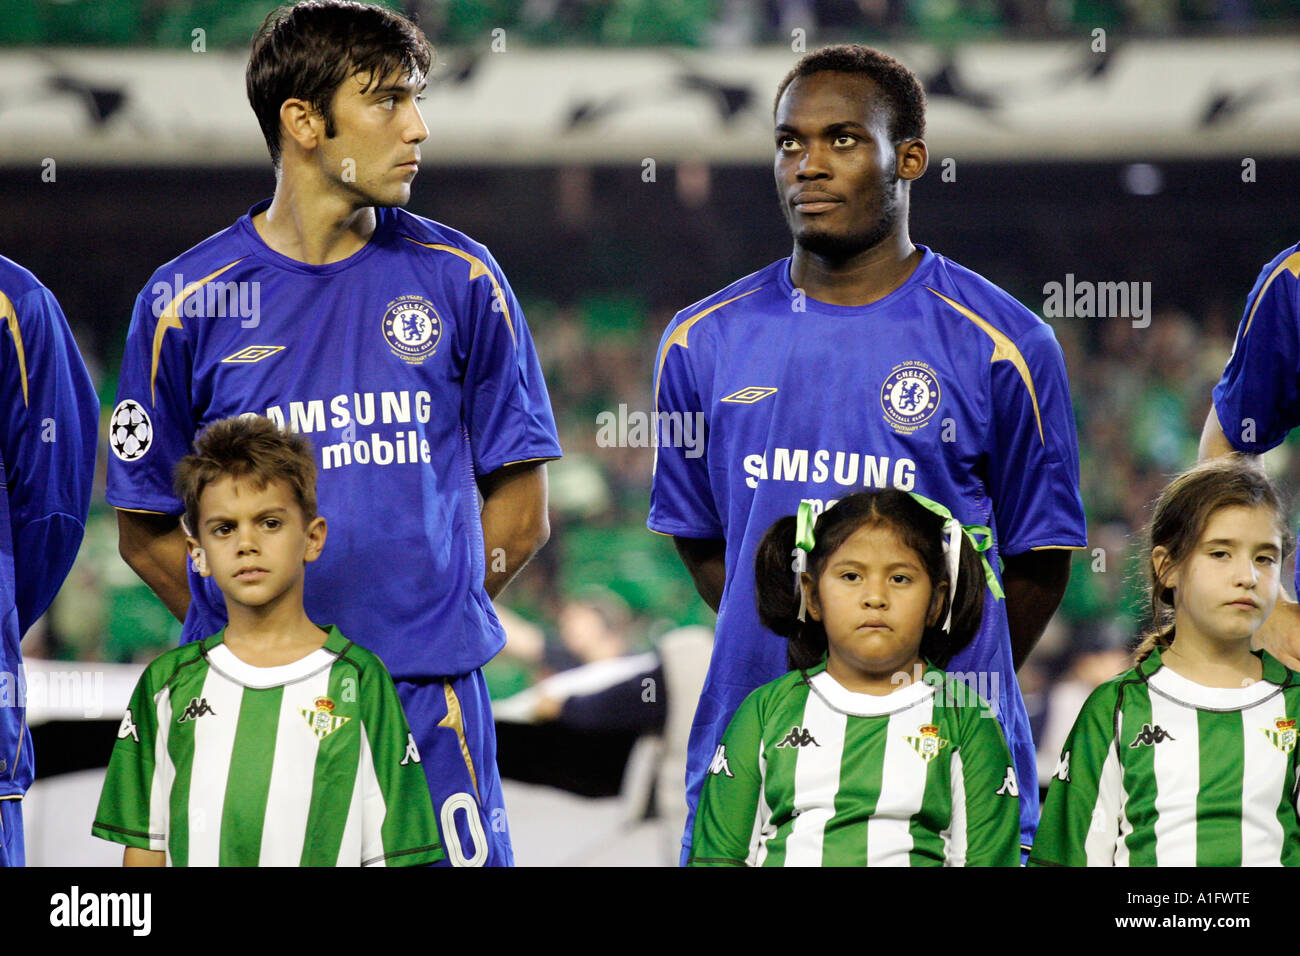 Ferreira And Essien Chelsea Fc Players Forming Before A Match Stock Photo Alamy